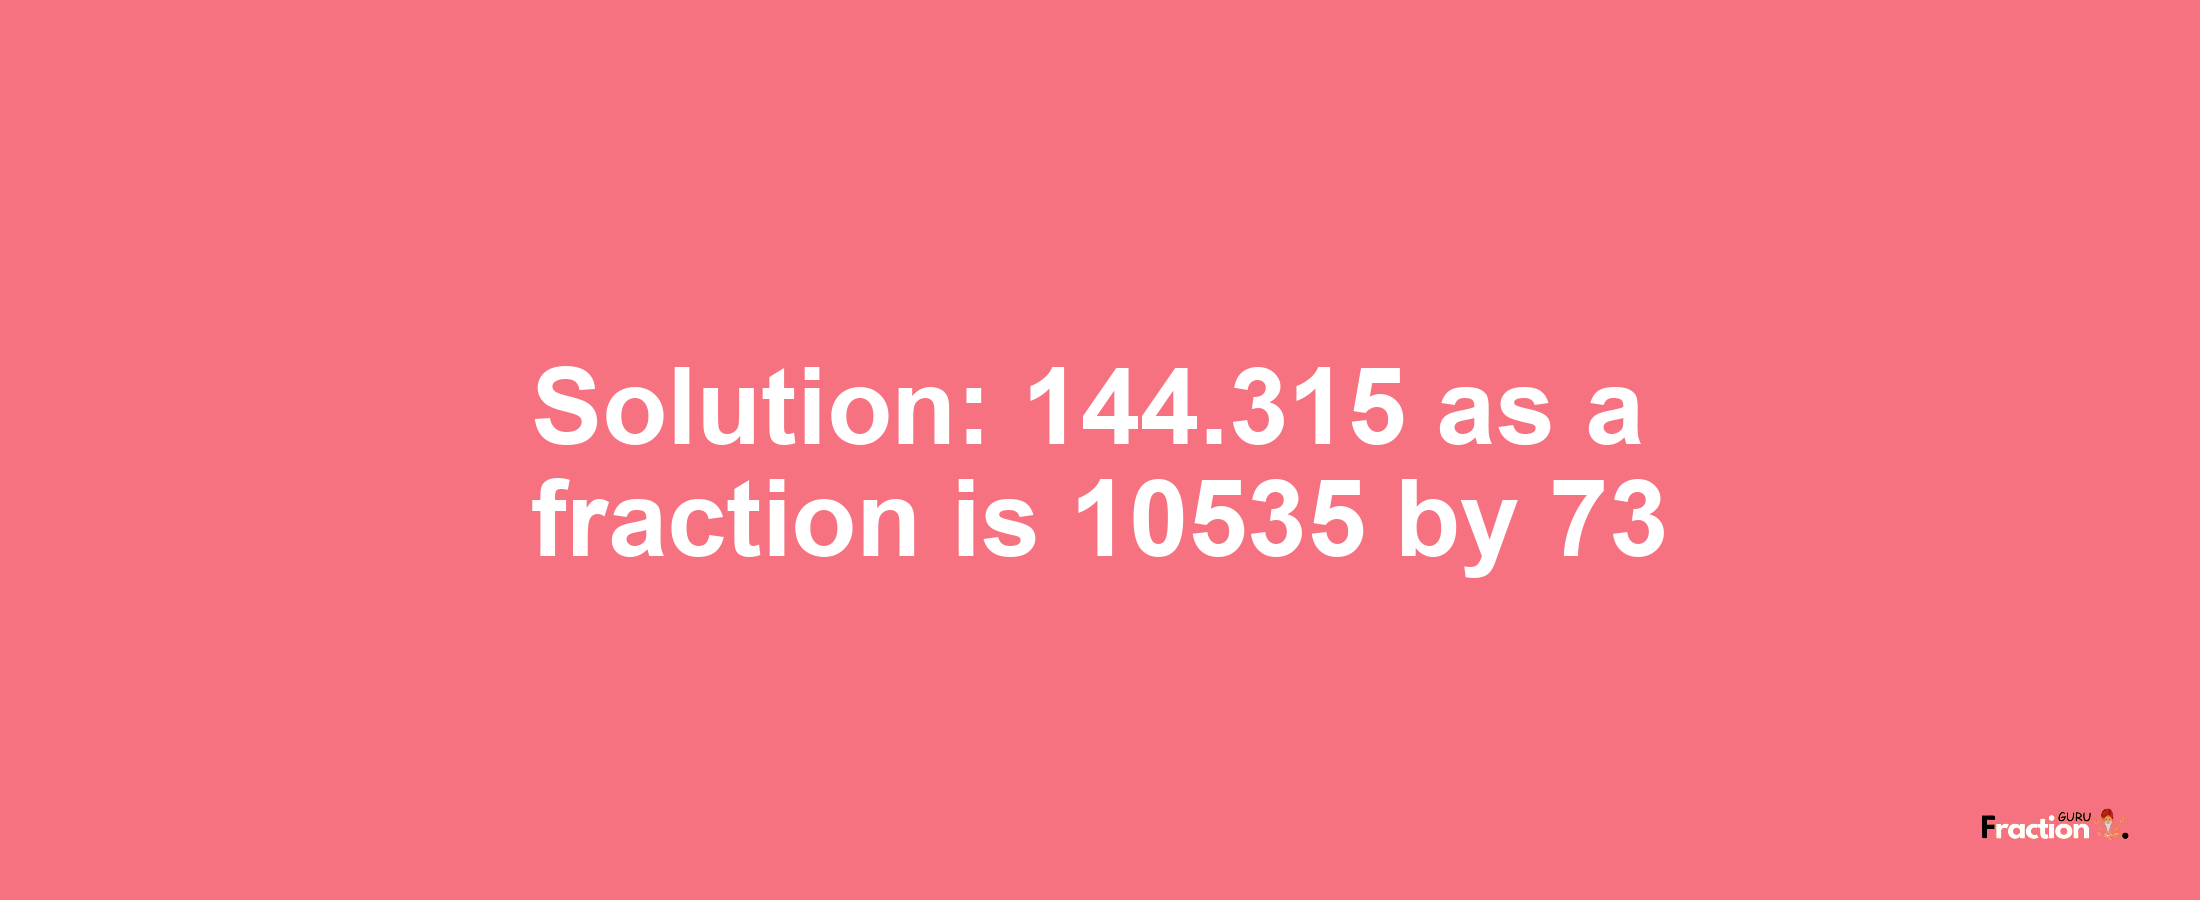 Solution:144.315 as a fraction is 10535/73